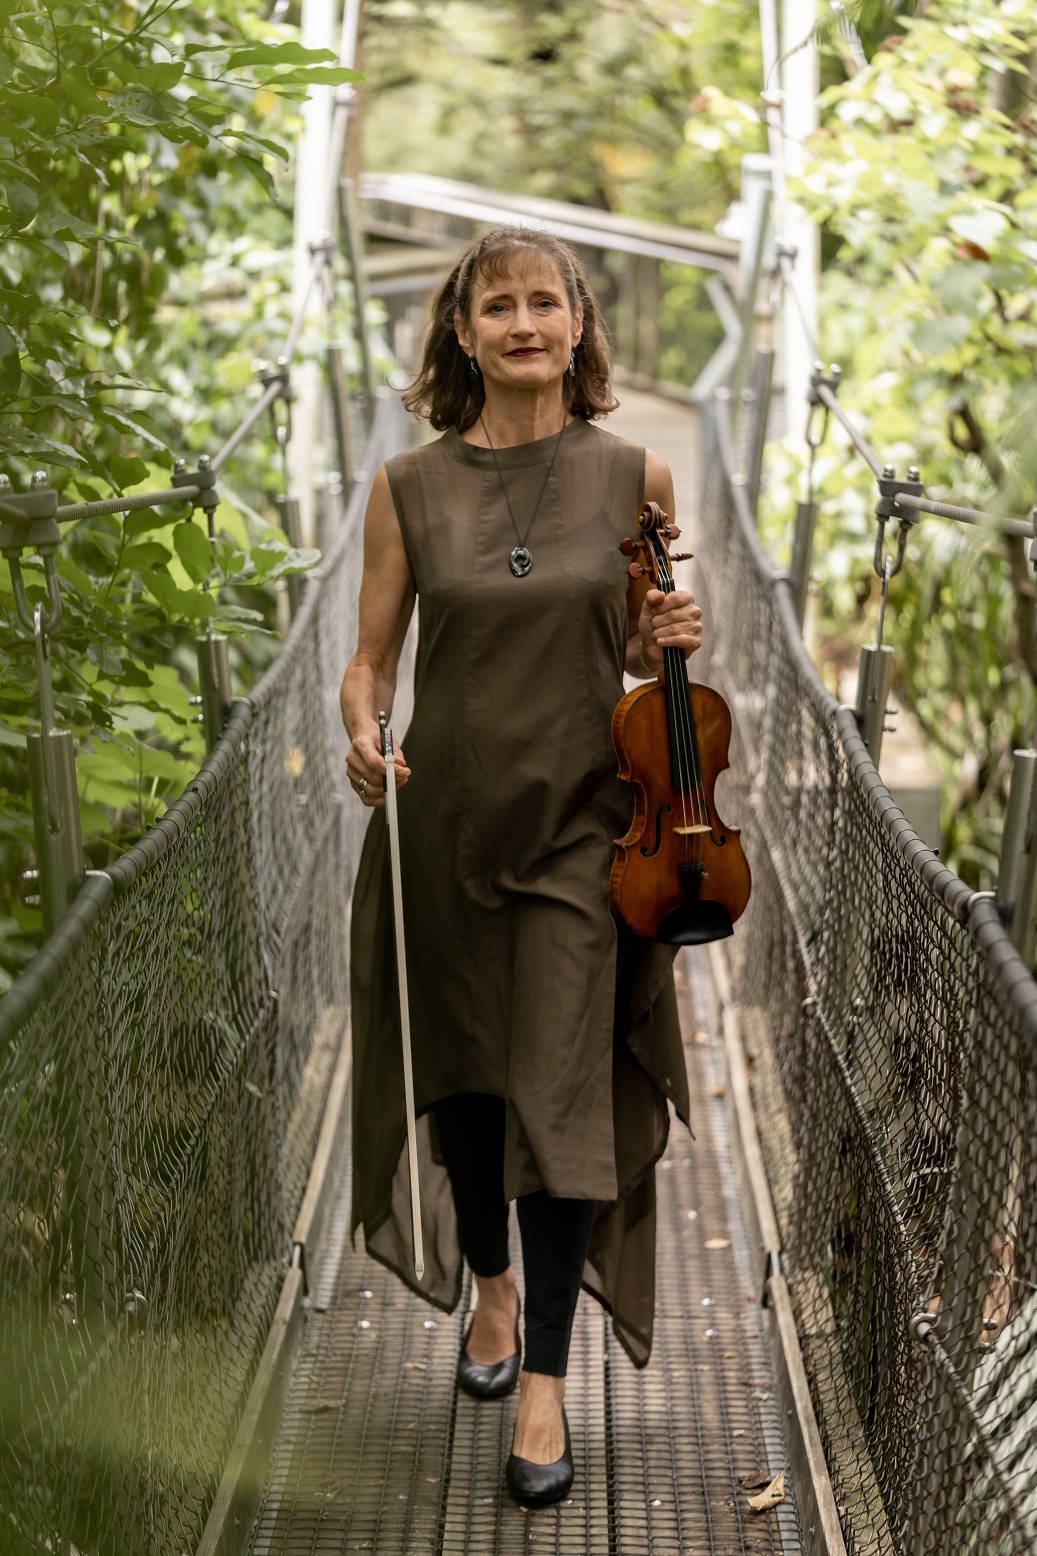 Helen Pohl is approaching her 30th anniversary of touring with the New Zealand String Quartet.